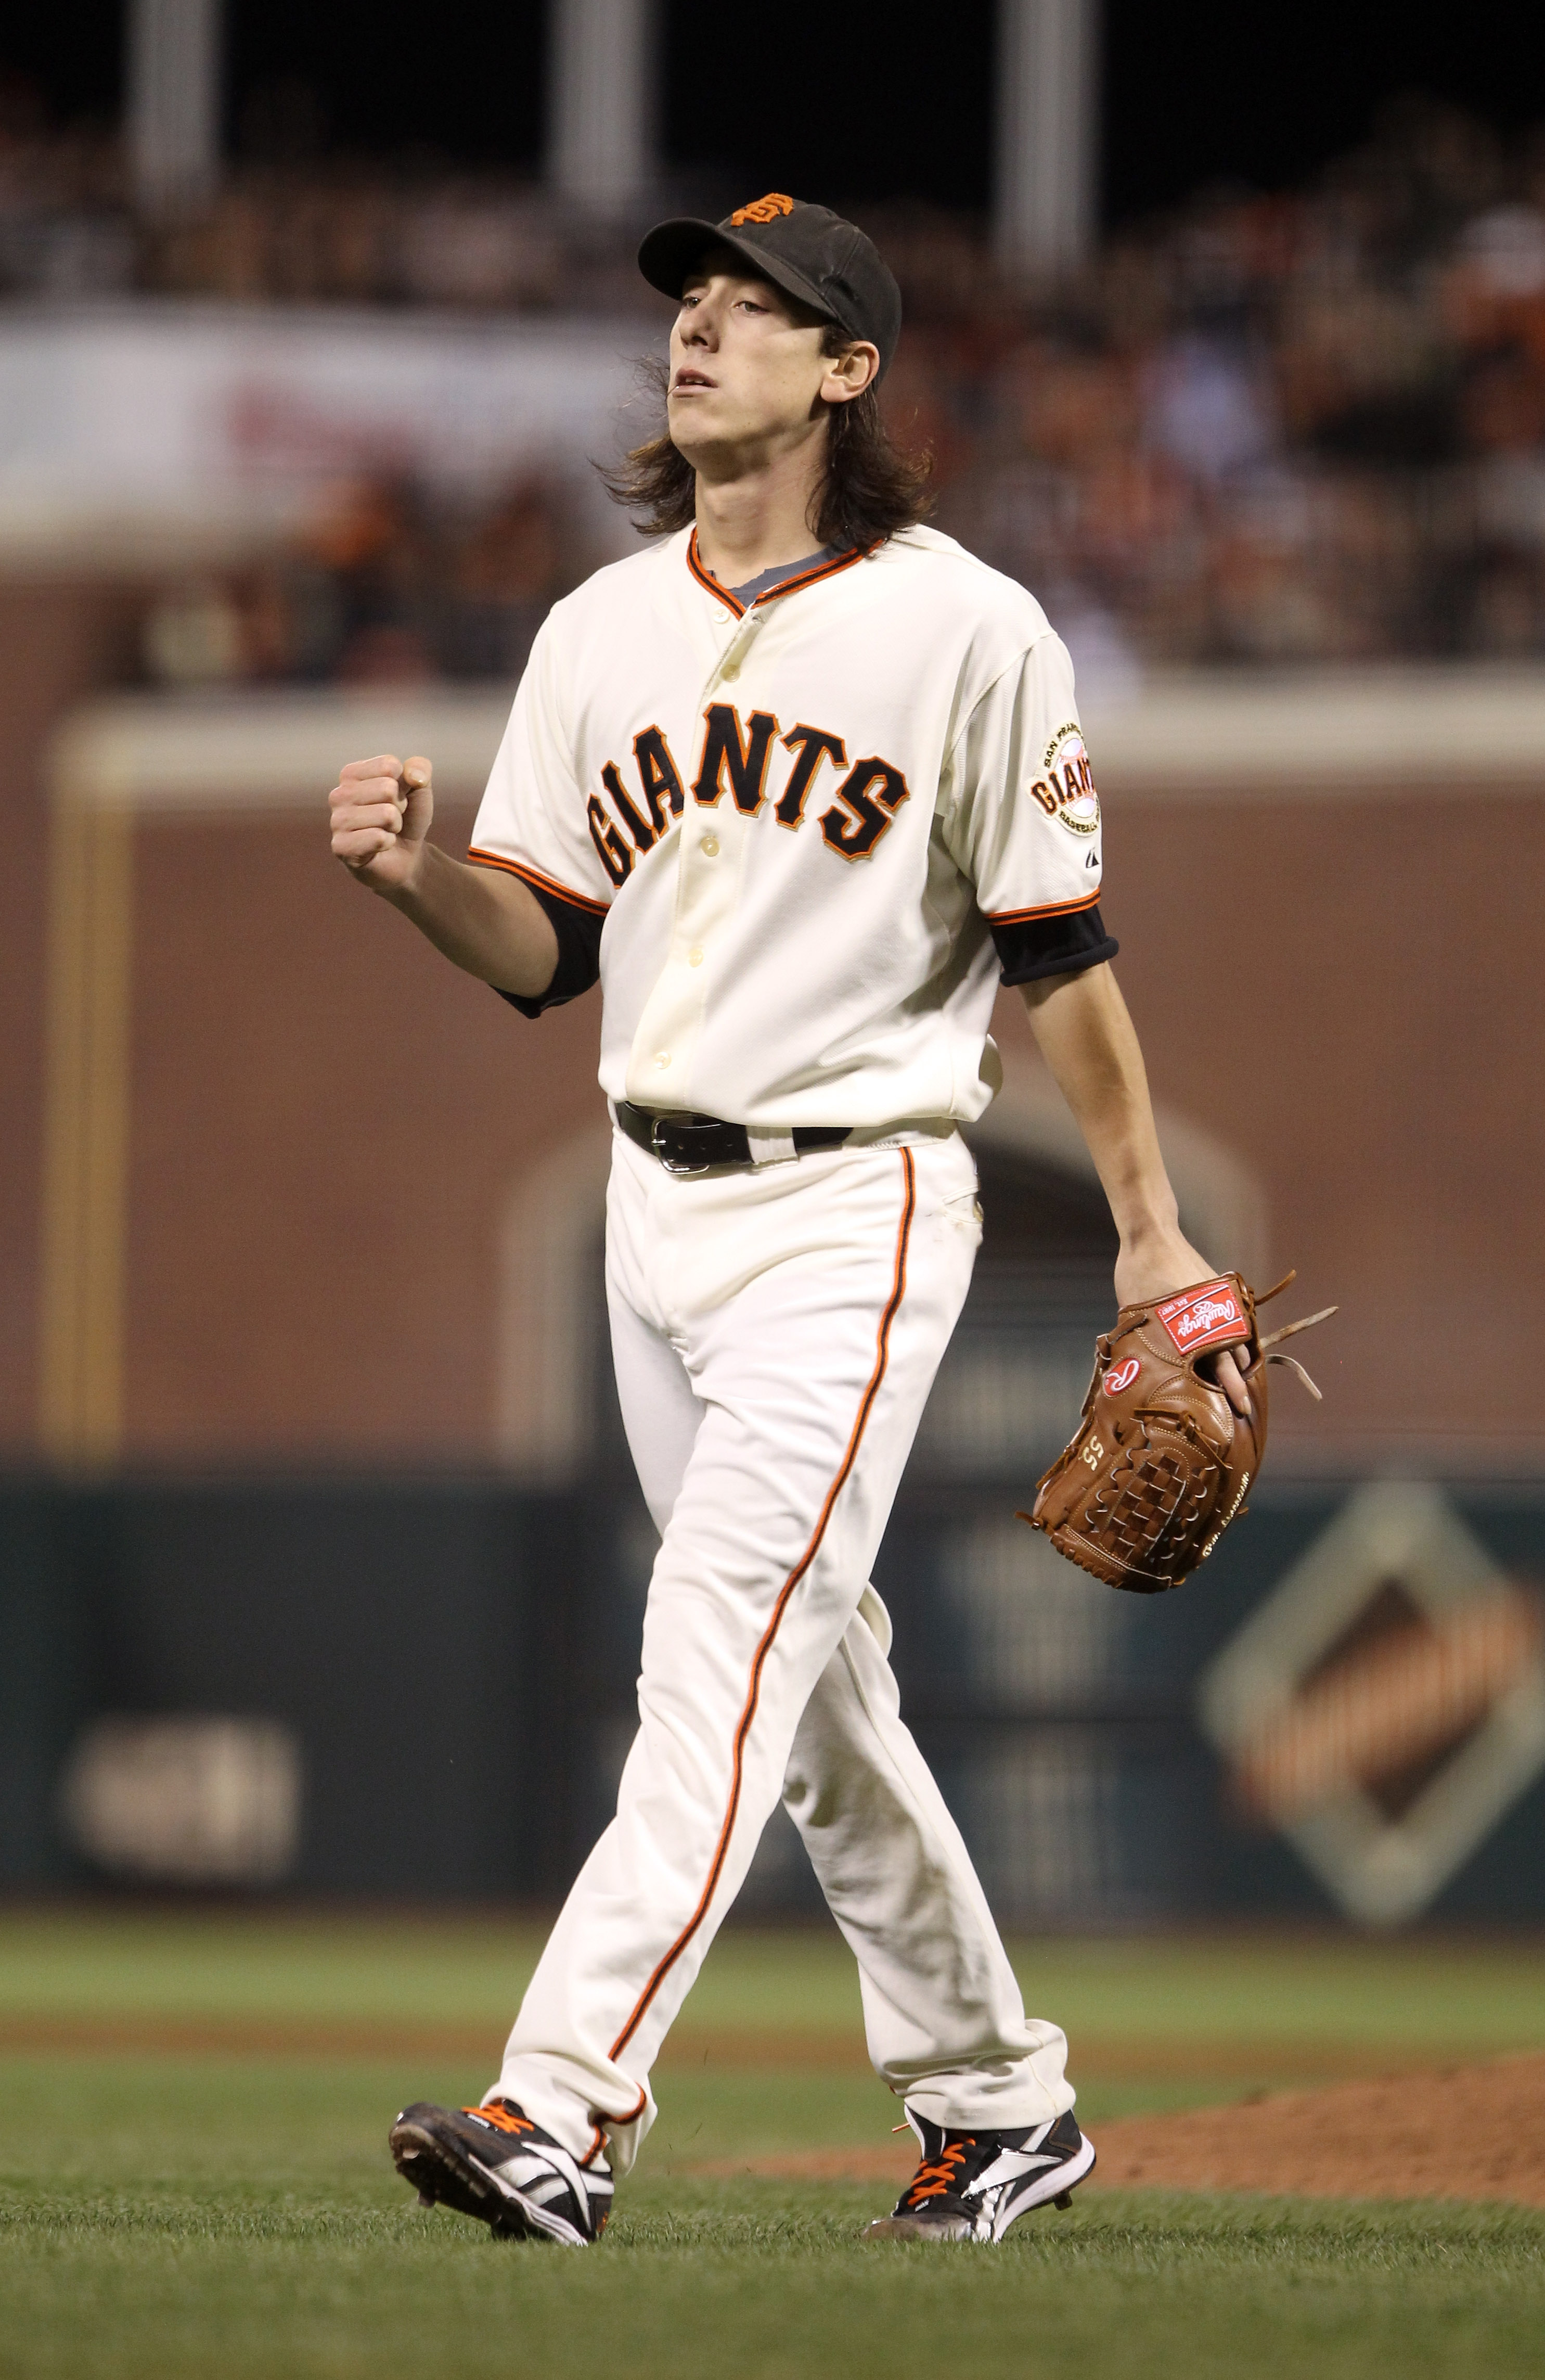 NLCS 2010: The 10 Greatest Pitching Gems In SF Giants Postseason